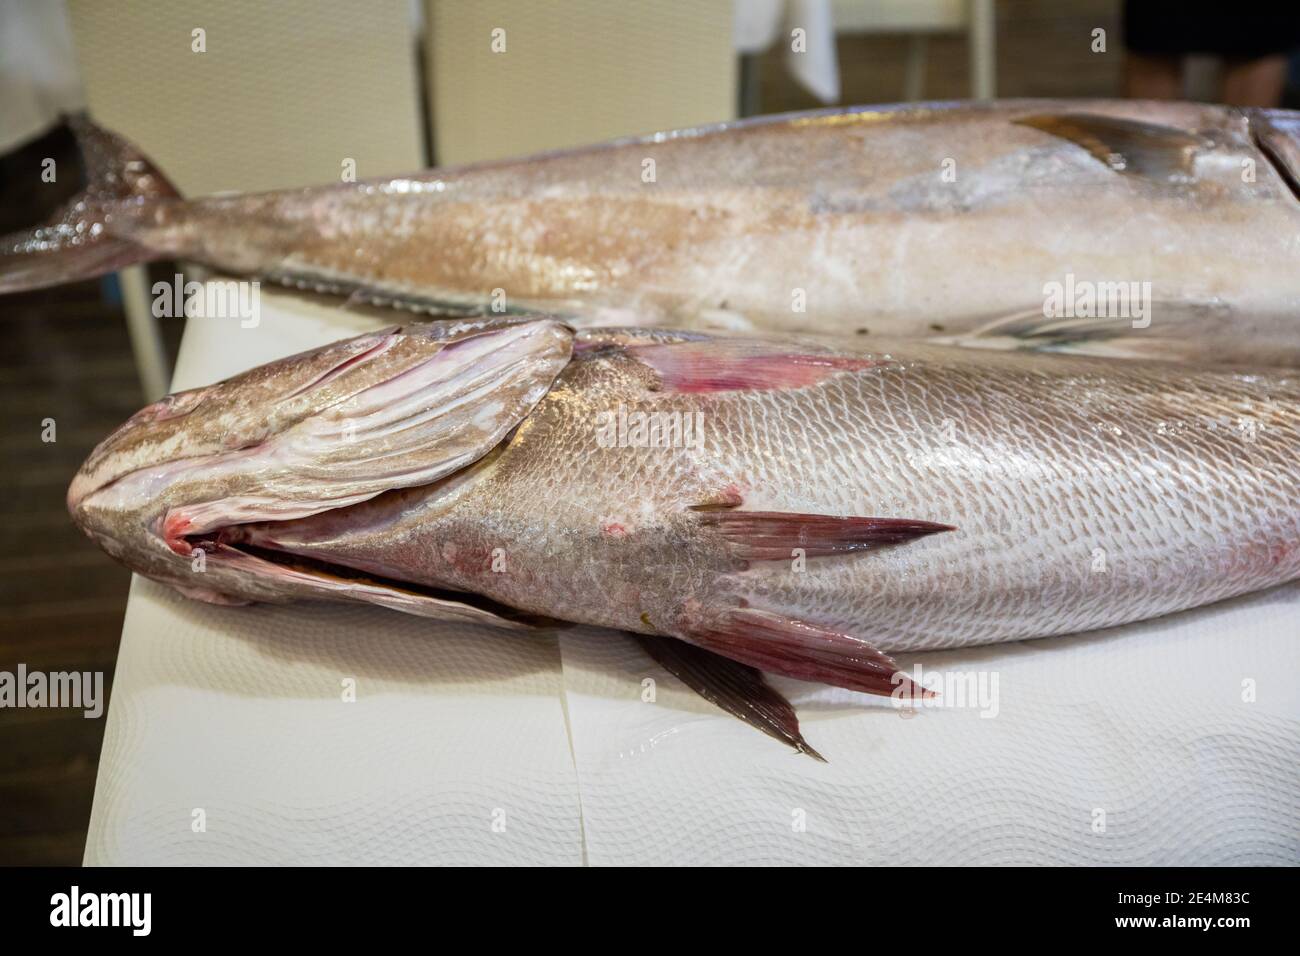 two big fresh raw fish Corvina (croaker, meager, meagre, jewfish) and Greater Amberjack, or Seriola Dumerili, on white paper tablecloth on table Stock Photo